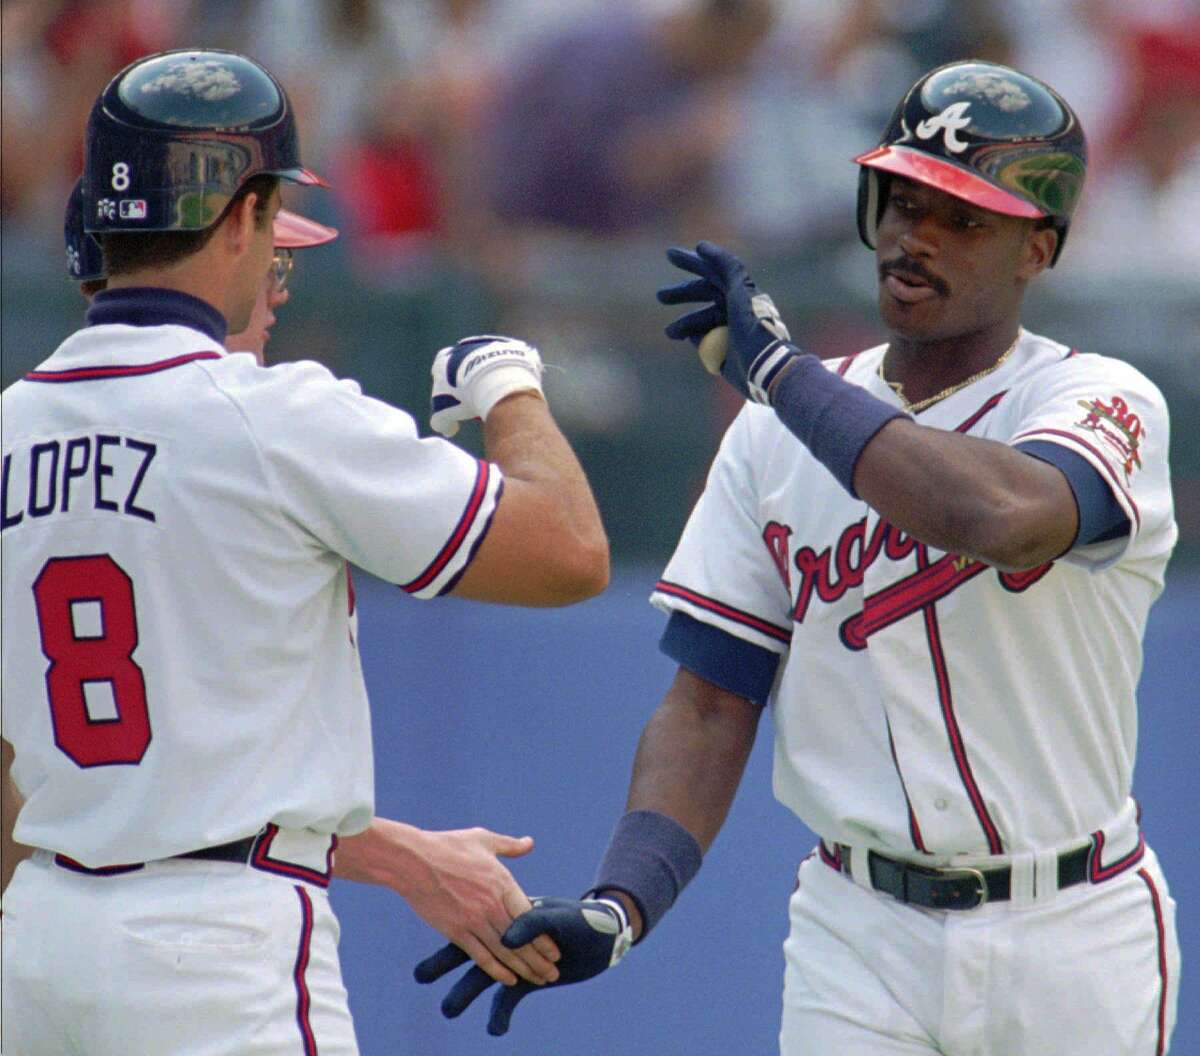 Atlanta Braves first baseman Fred McGriff, right, is congratulated by catcher Javier Lopez on his first homer of the season Wednesday, April 26, 1995 in Atlanta. The Braves defeated the San Francisco Giants 12-5 with McGriff getting two homers. (AP Photo/John Bazemore)